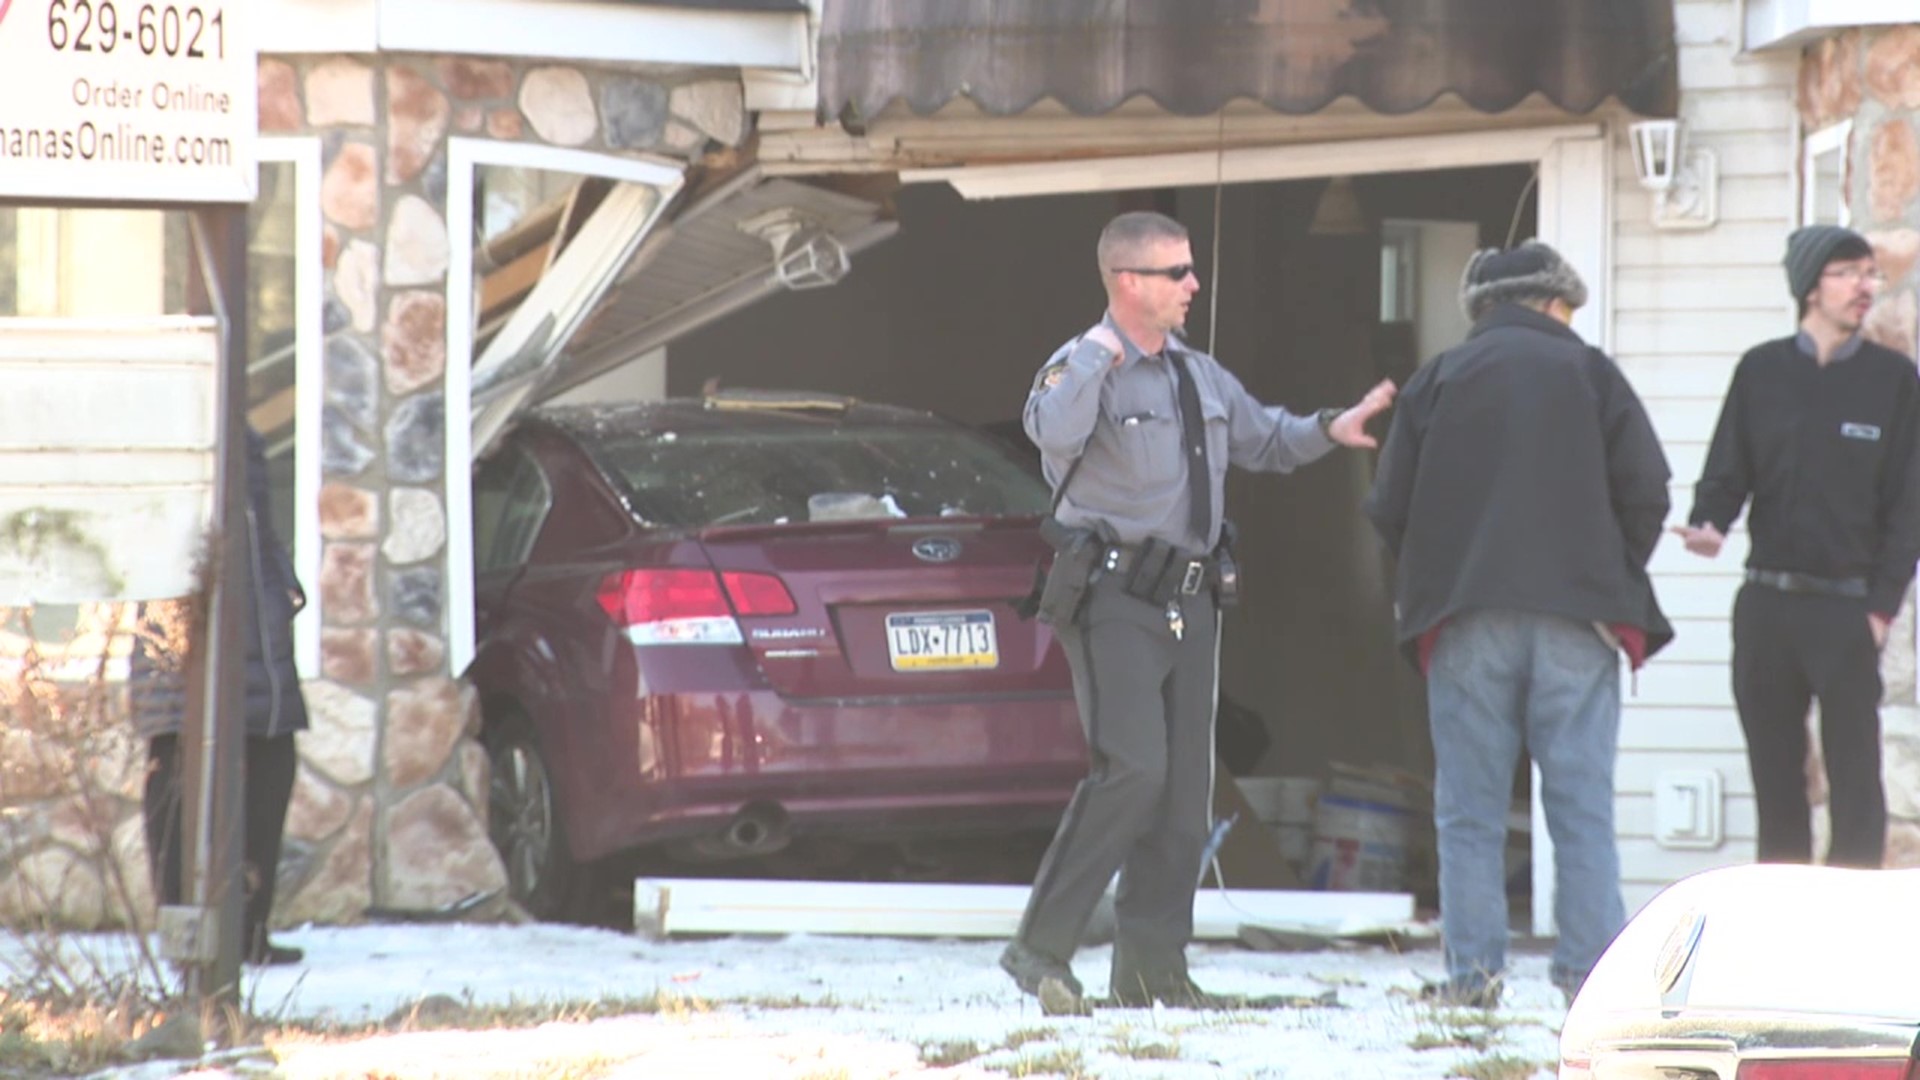 The vehicle crashed into a former restaurant near Effort Friday afternoon.